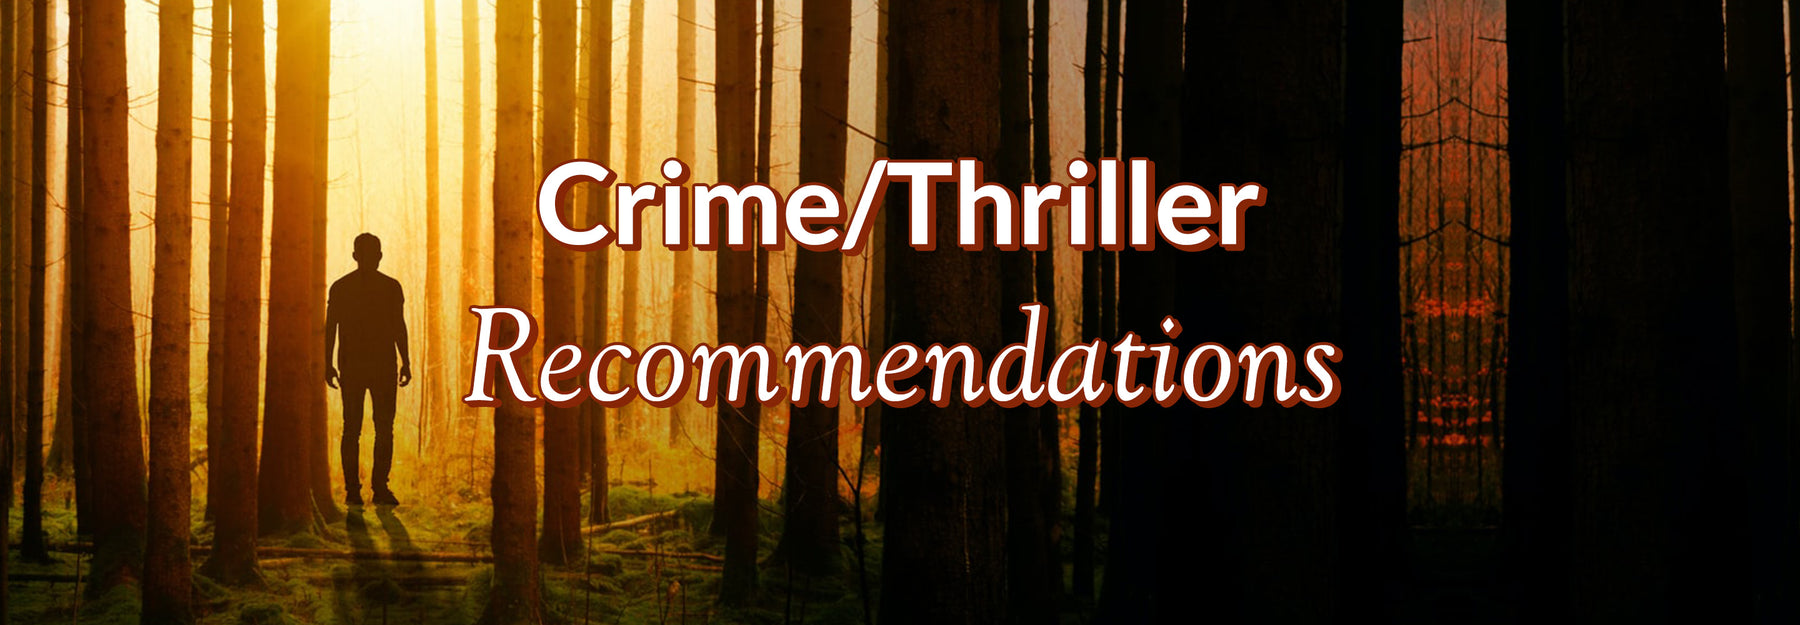 Crime/Thriller Book Recommendations for Winter 2022